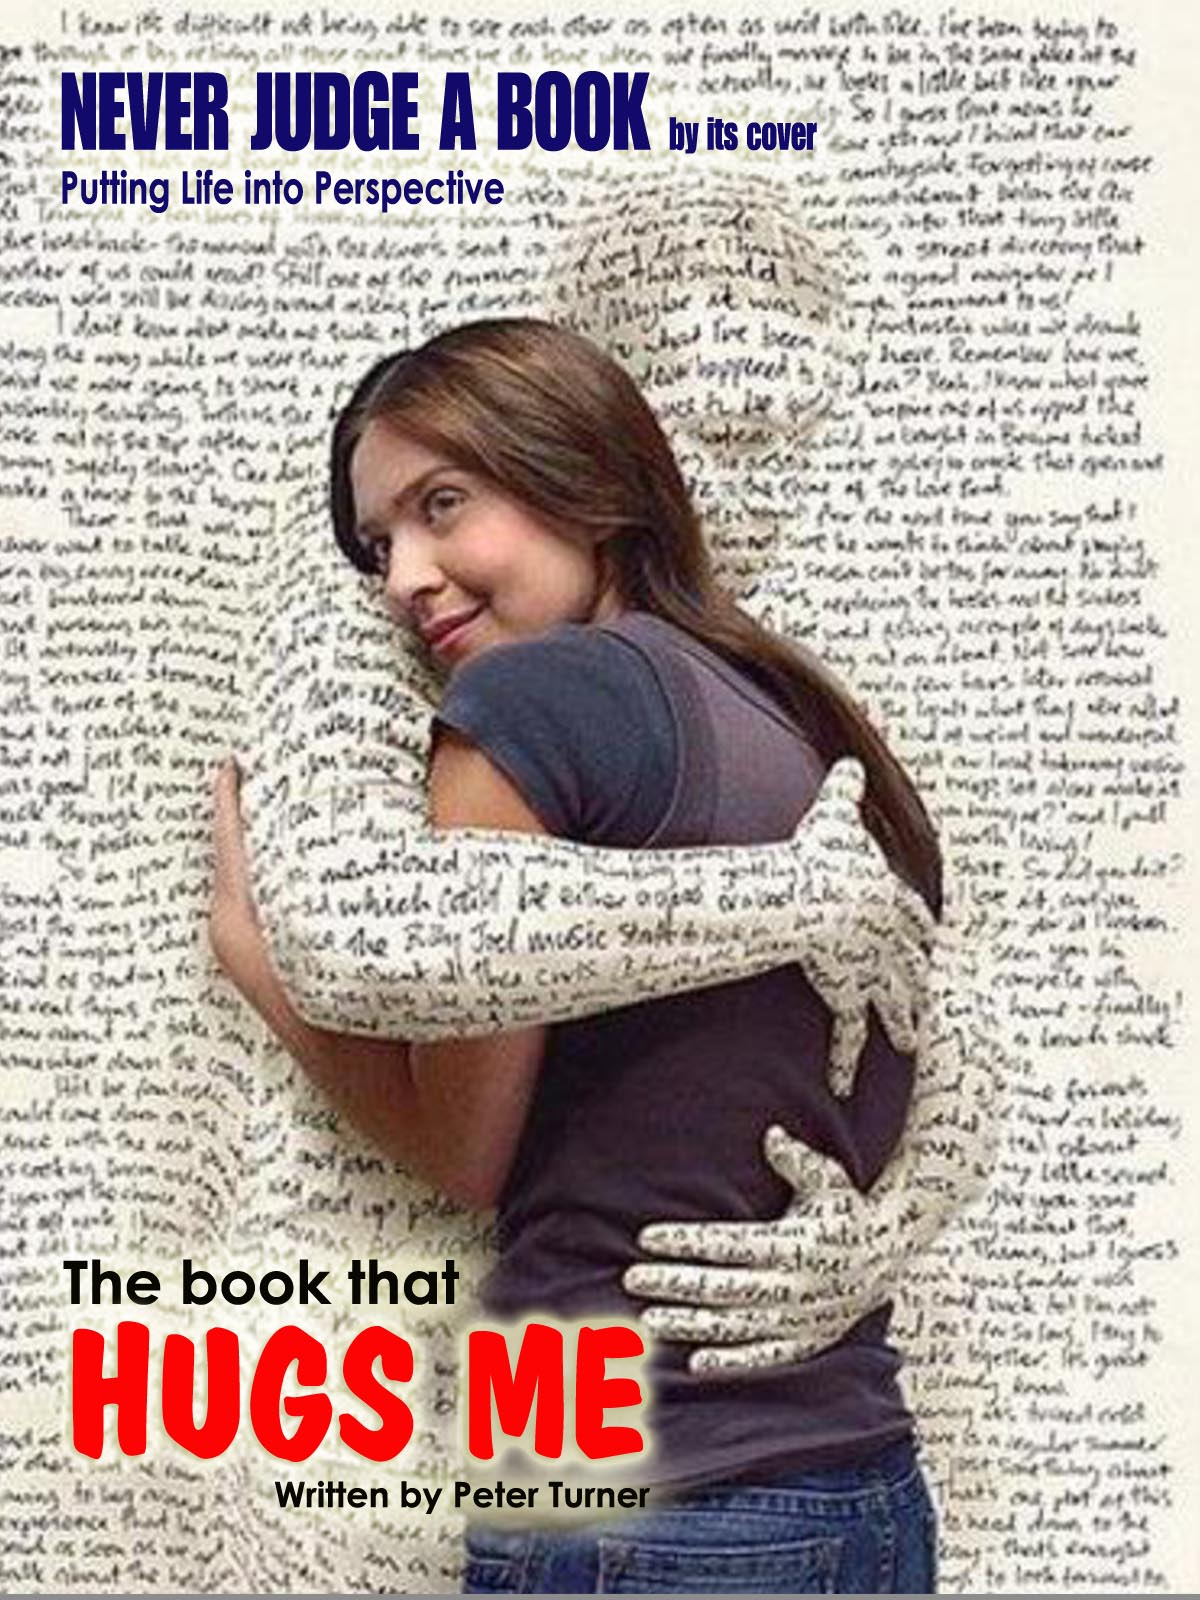 The book that hugs me